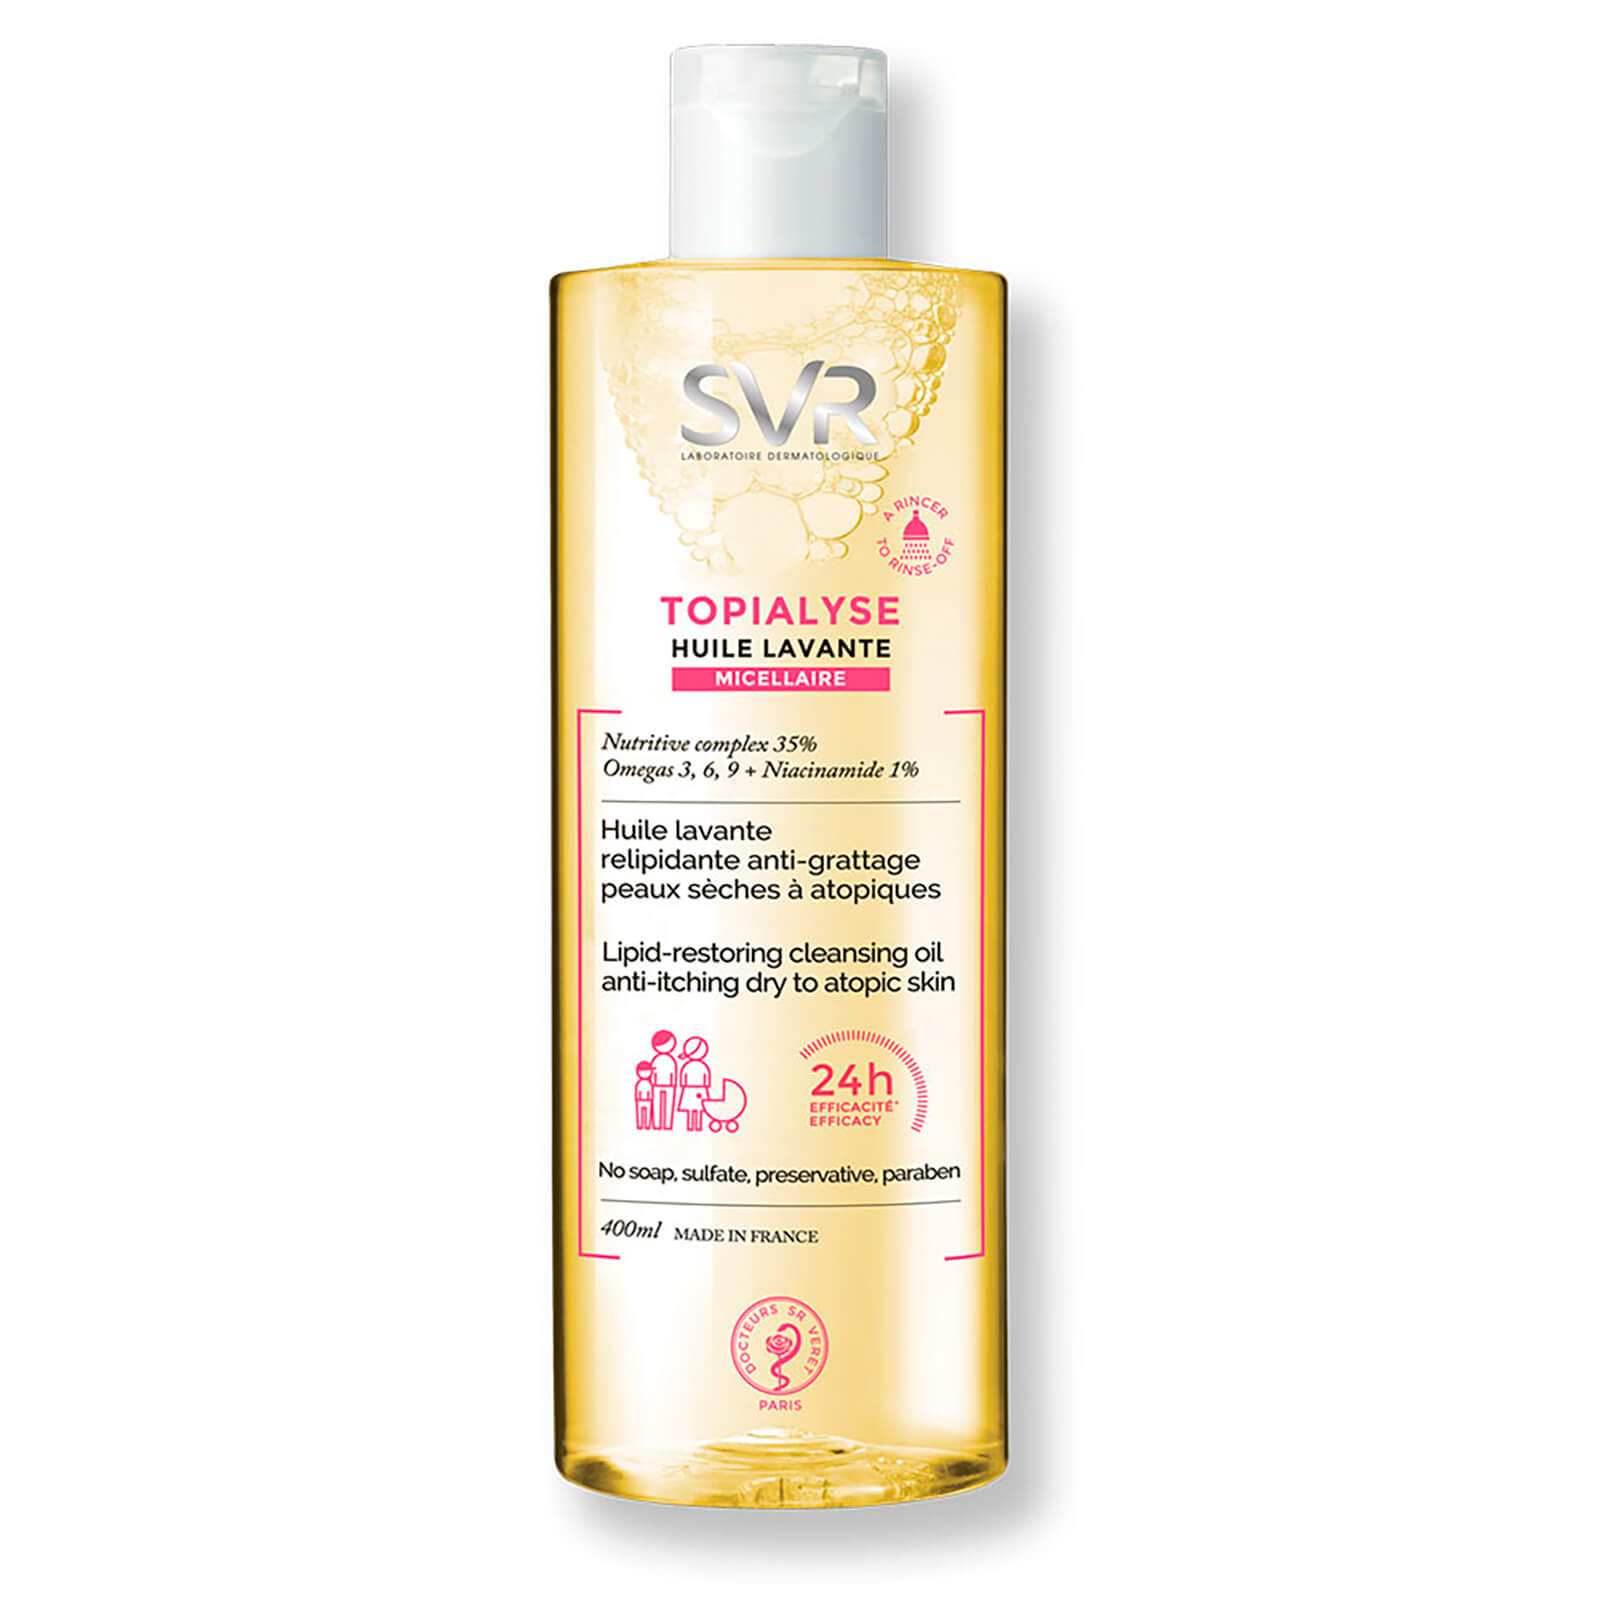 SVR Topialyse Emulsifying Wash-Off Micellar Cleansing Oil - 400ml